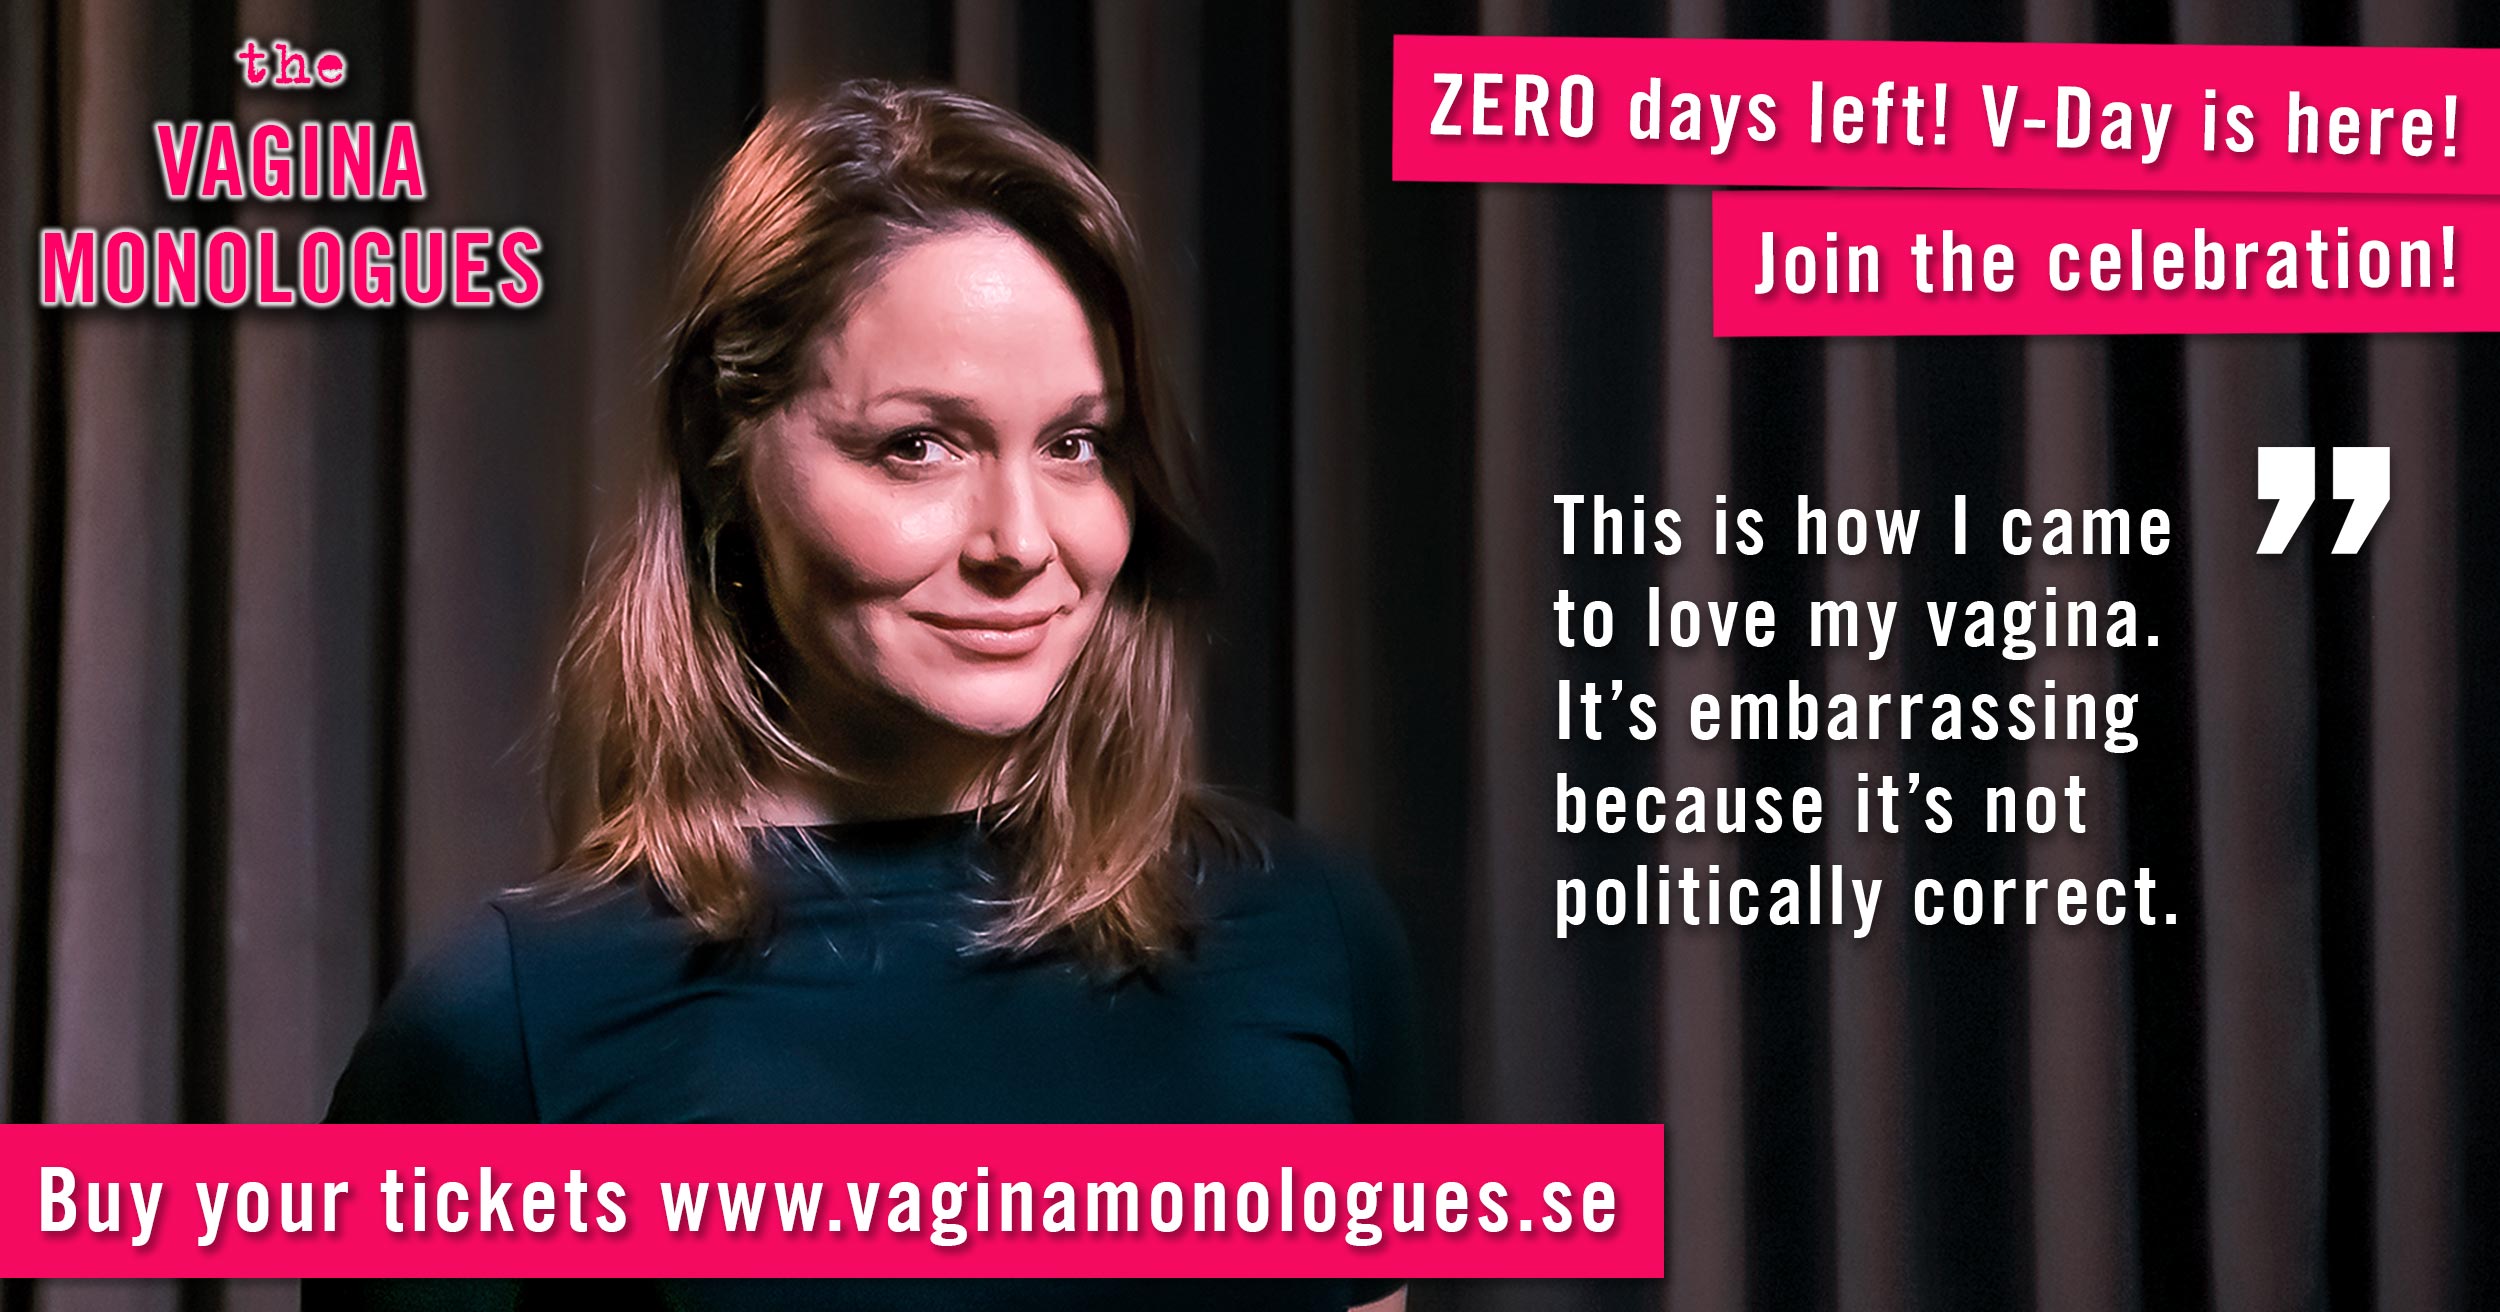 Berna is performing at The Vagina Monologues on 6th March 2020. Buy tickets at vaginamonologues.se!